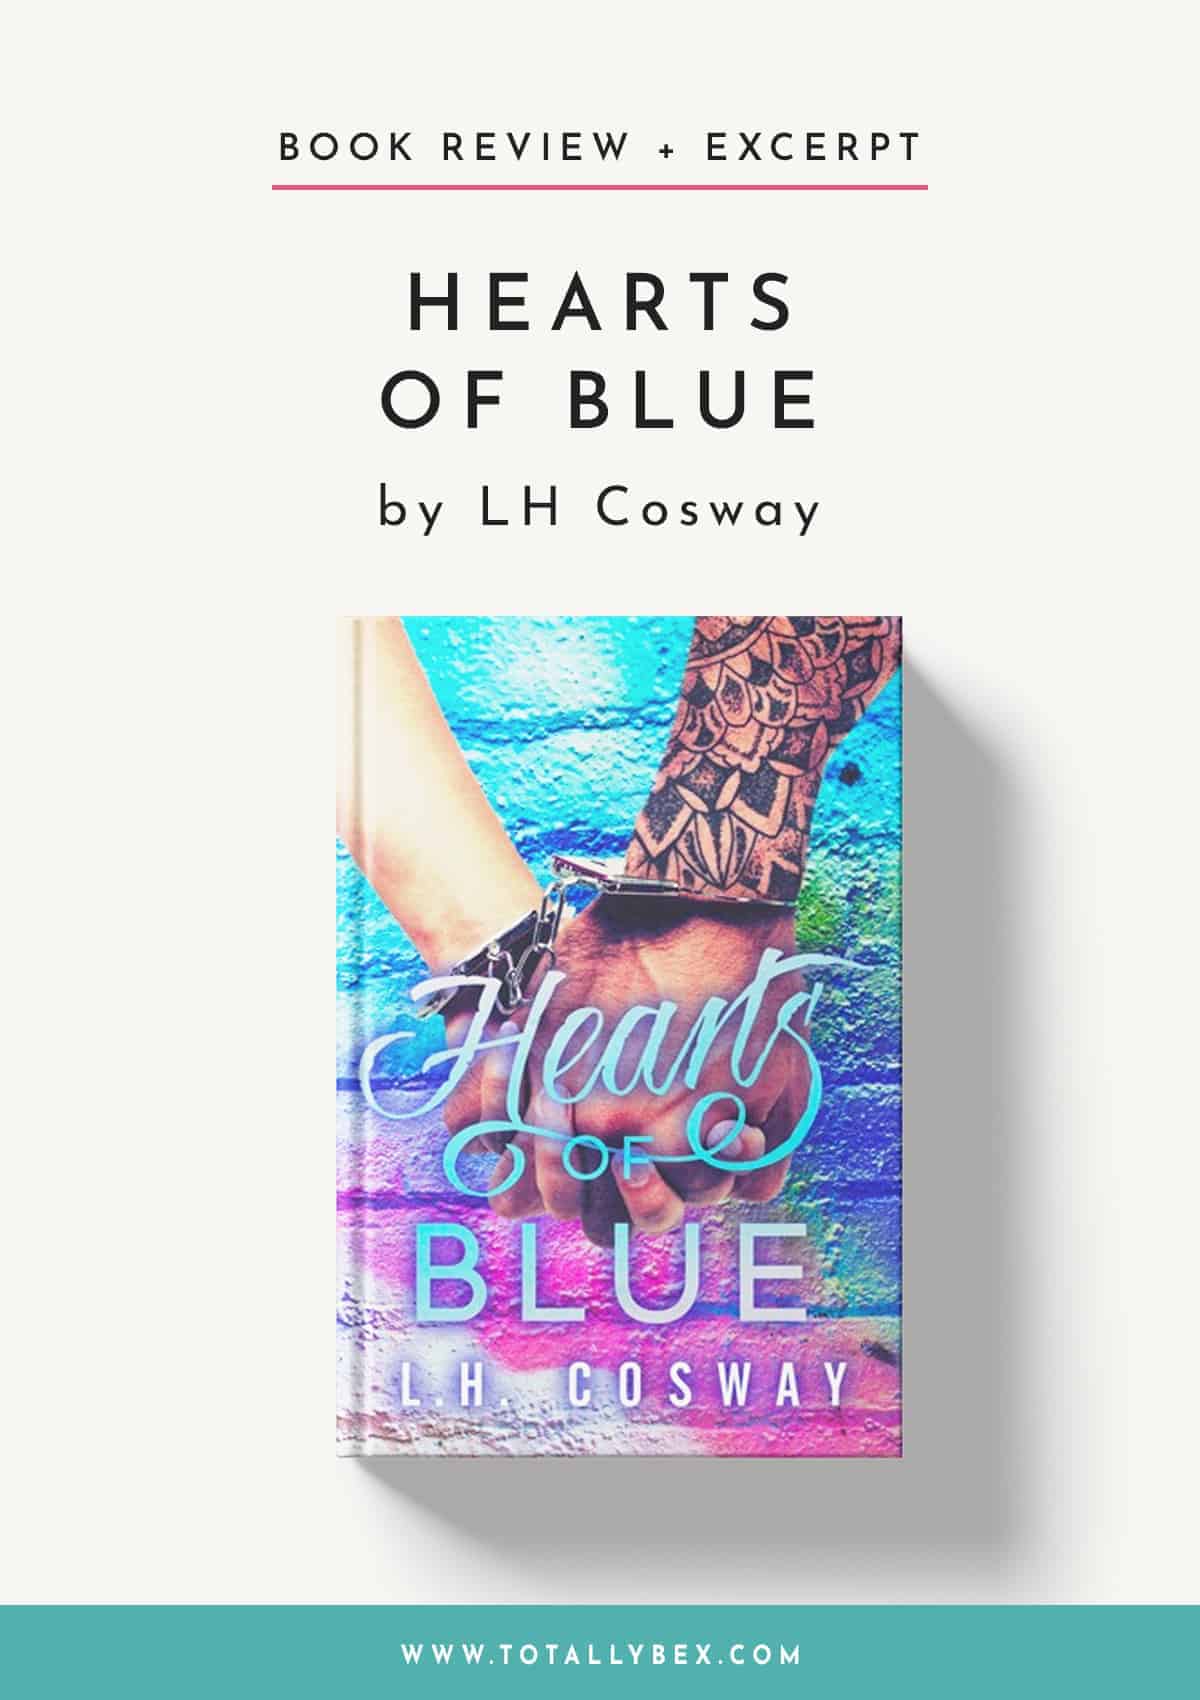 Hearts of Blue by LH Cosway – Book 4 of the Hearts Series